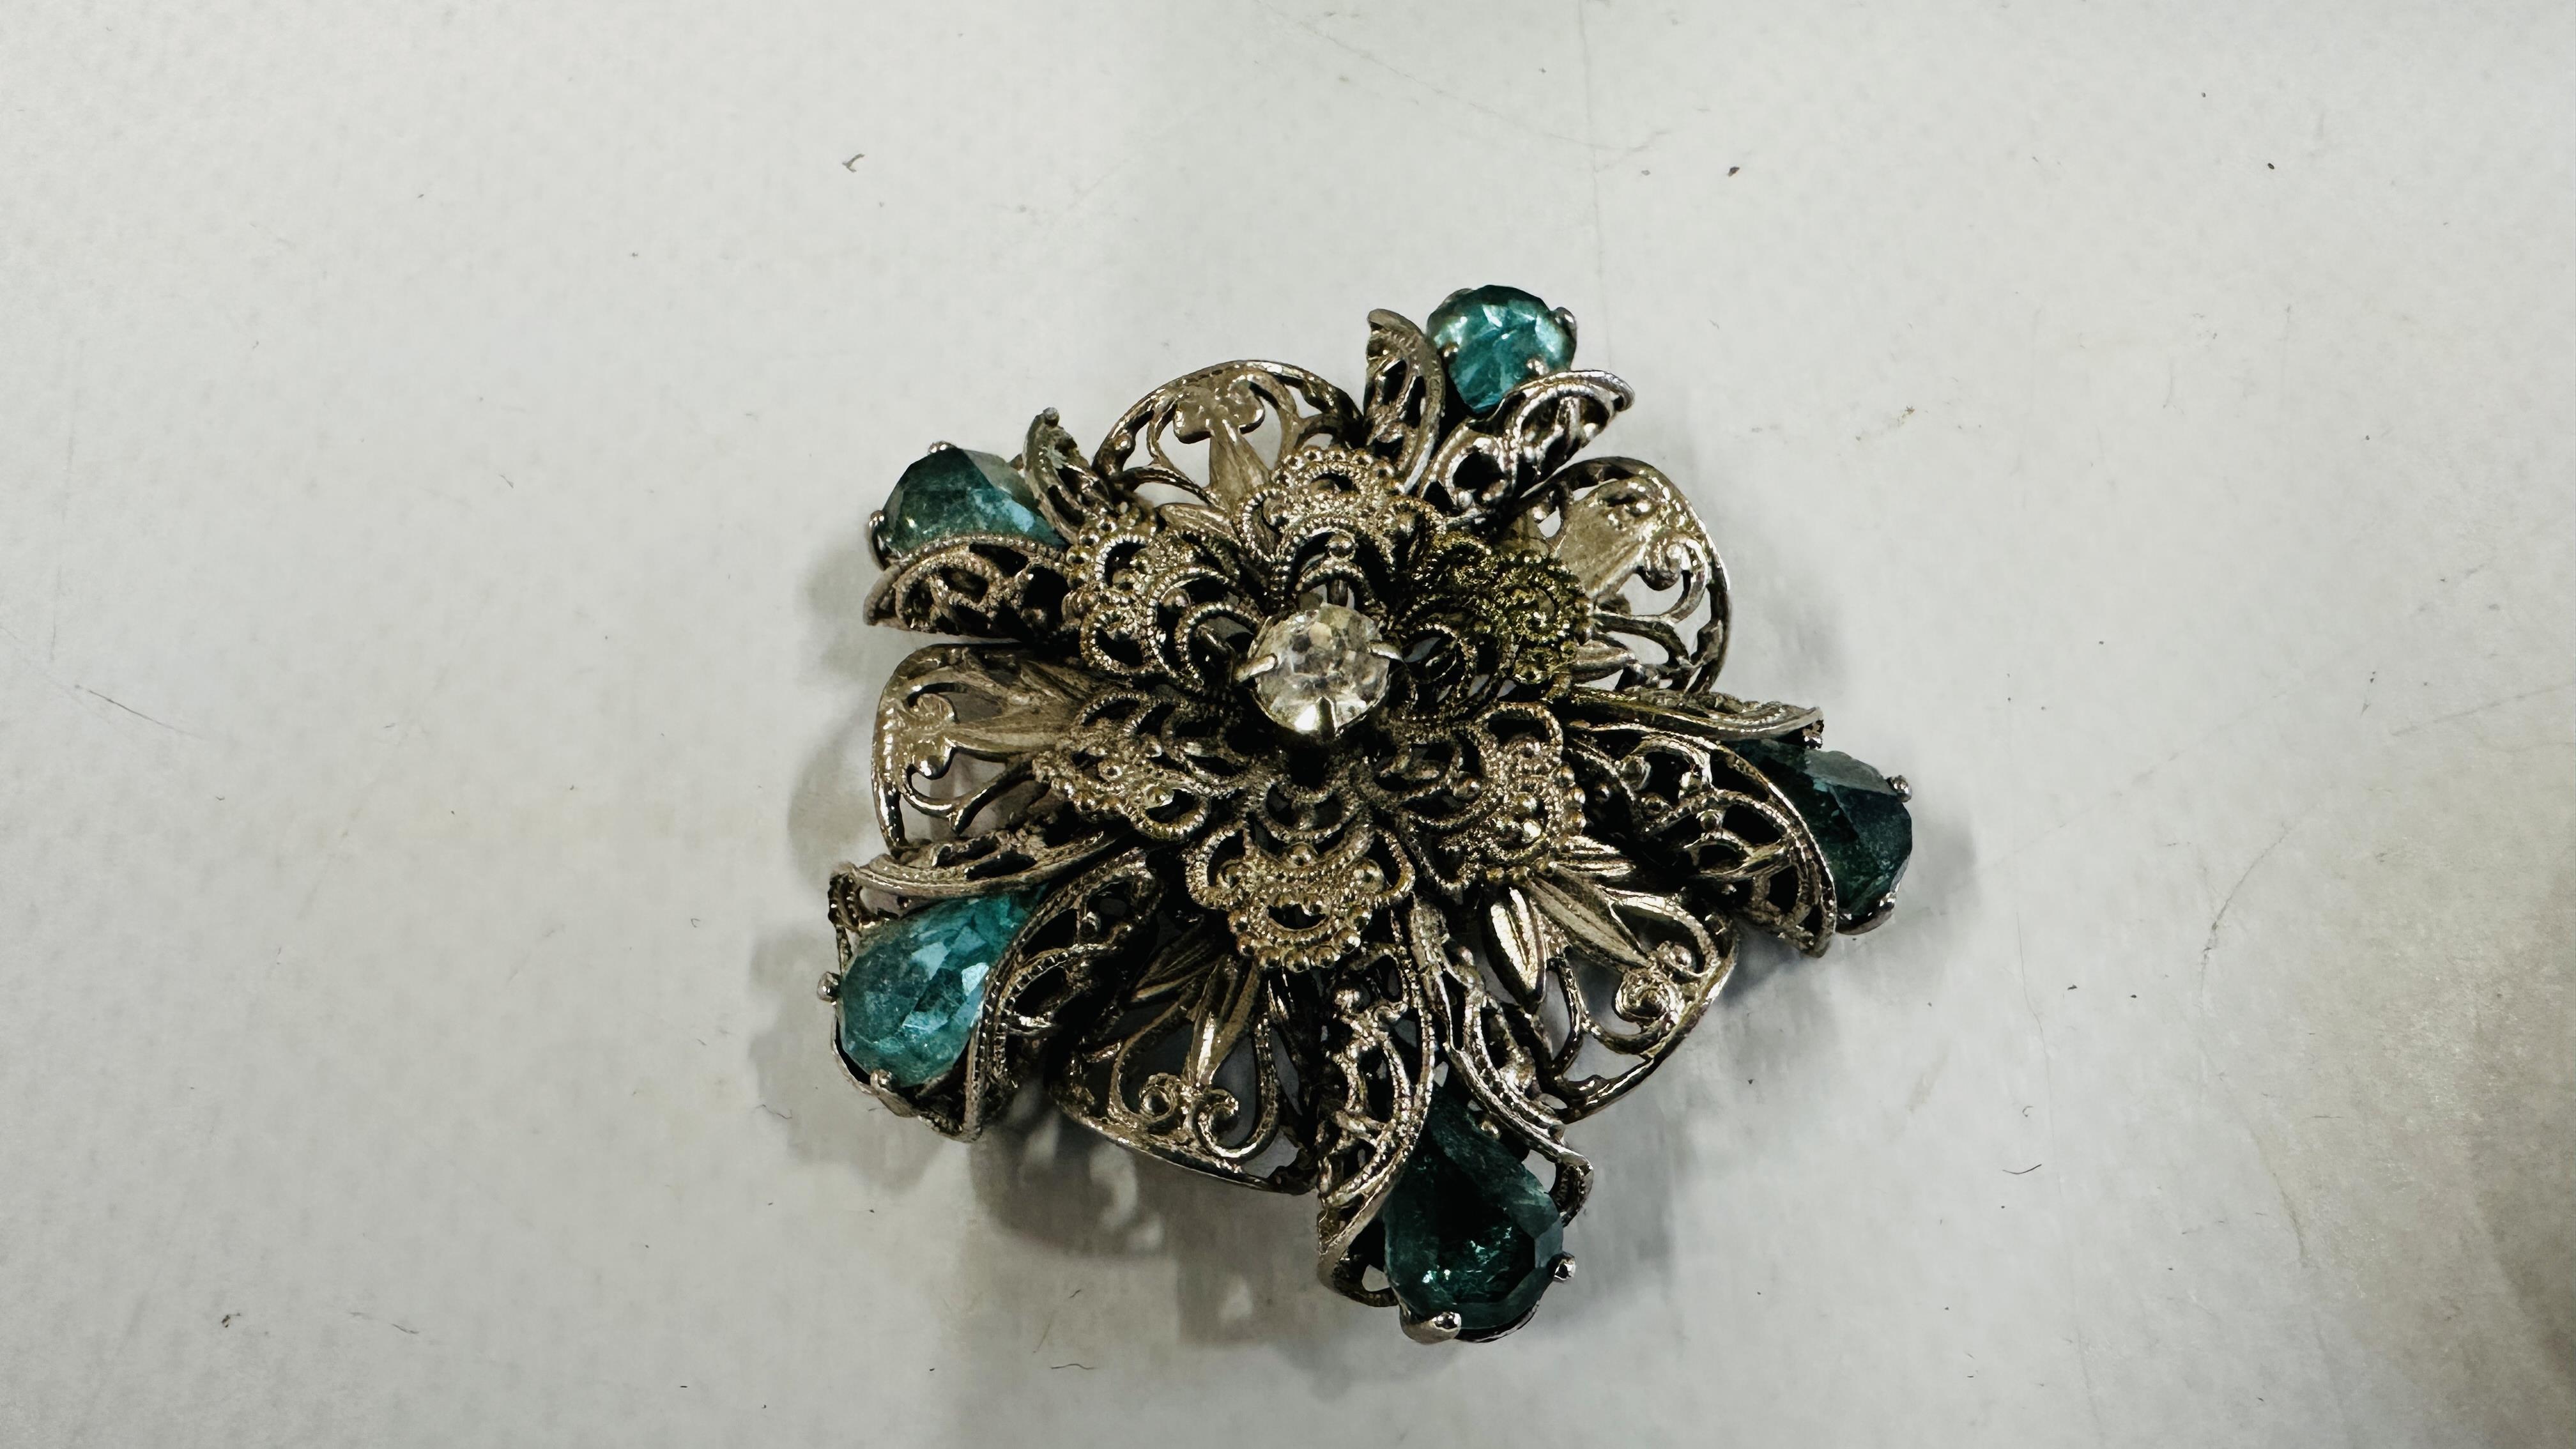 A VINTAGE JEWELLERY BOX WITH MOSAIC BRACELET, BROOCHES, NECKLACES AND A MARCASITE WATCH. - Image 5 of 8